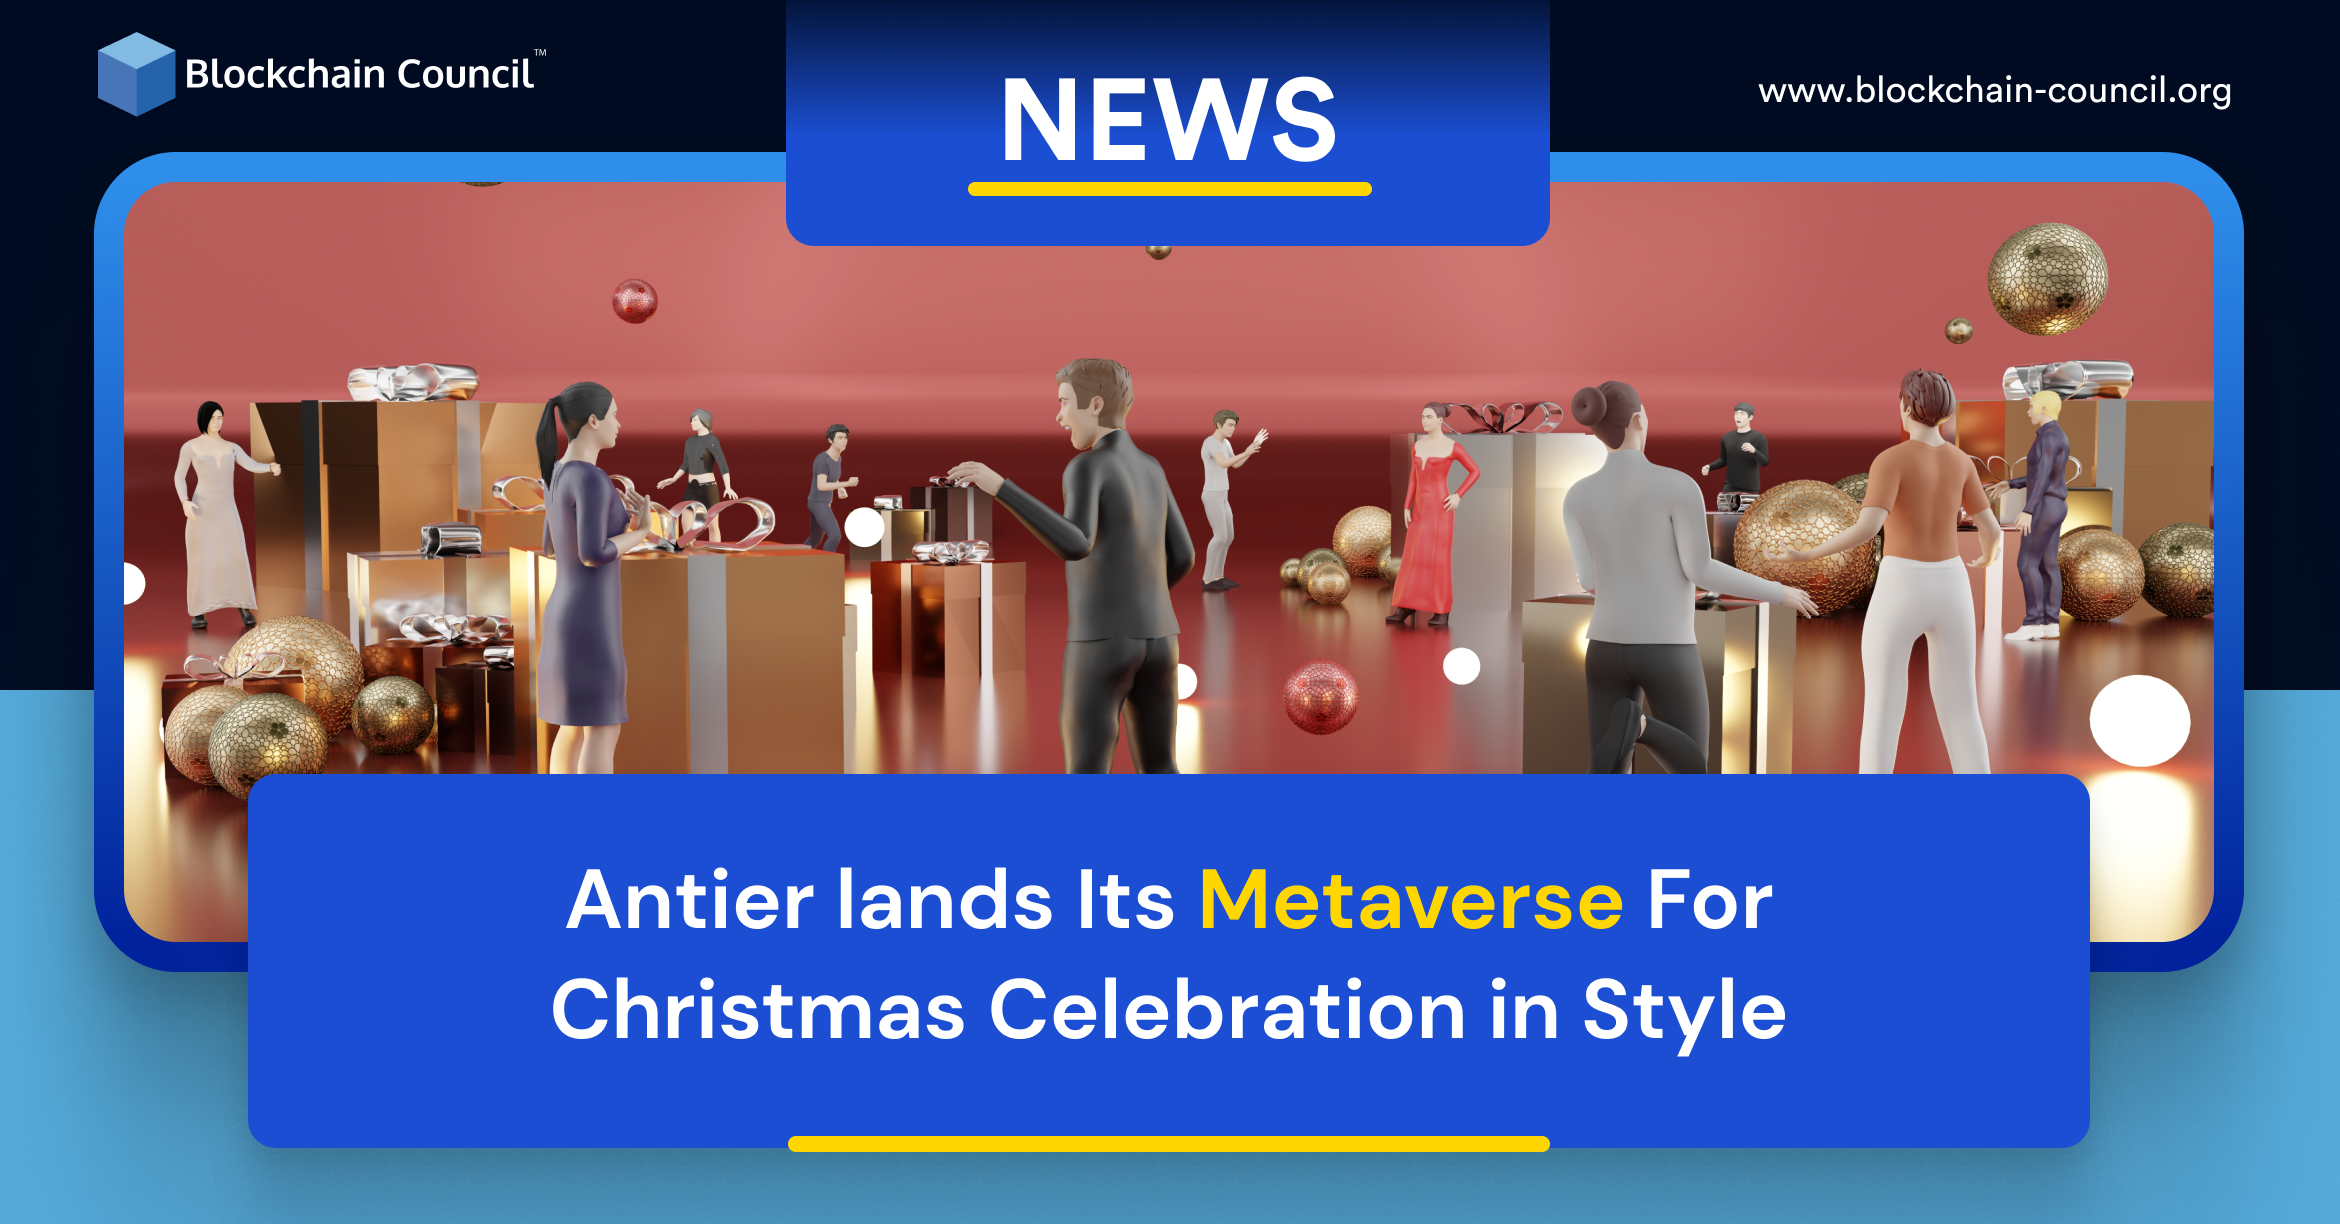 Antier lands Its Metaverse For Christmas Celebration in Style